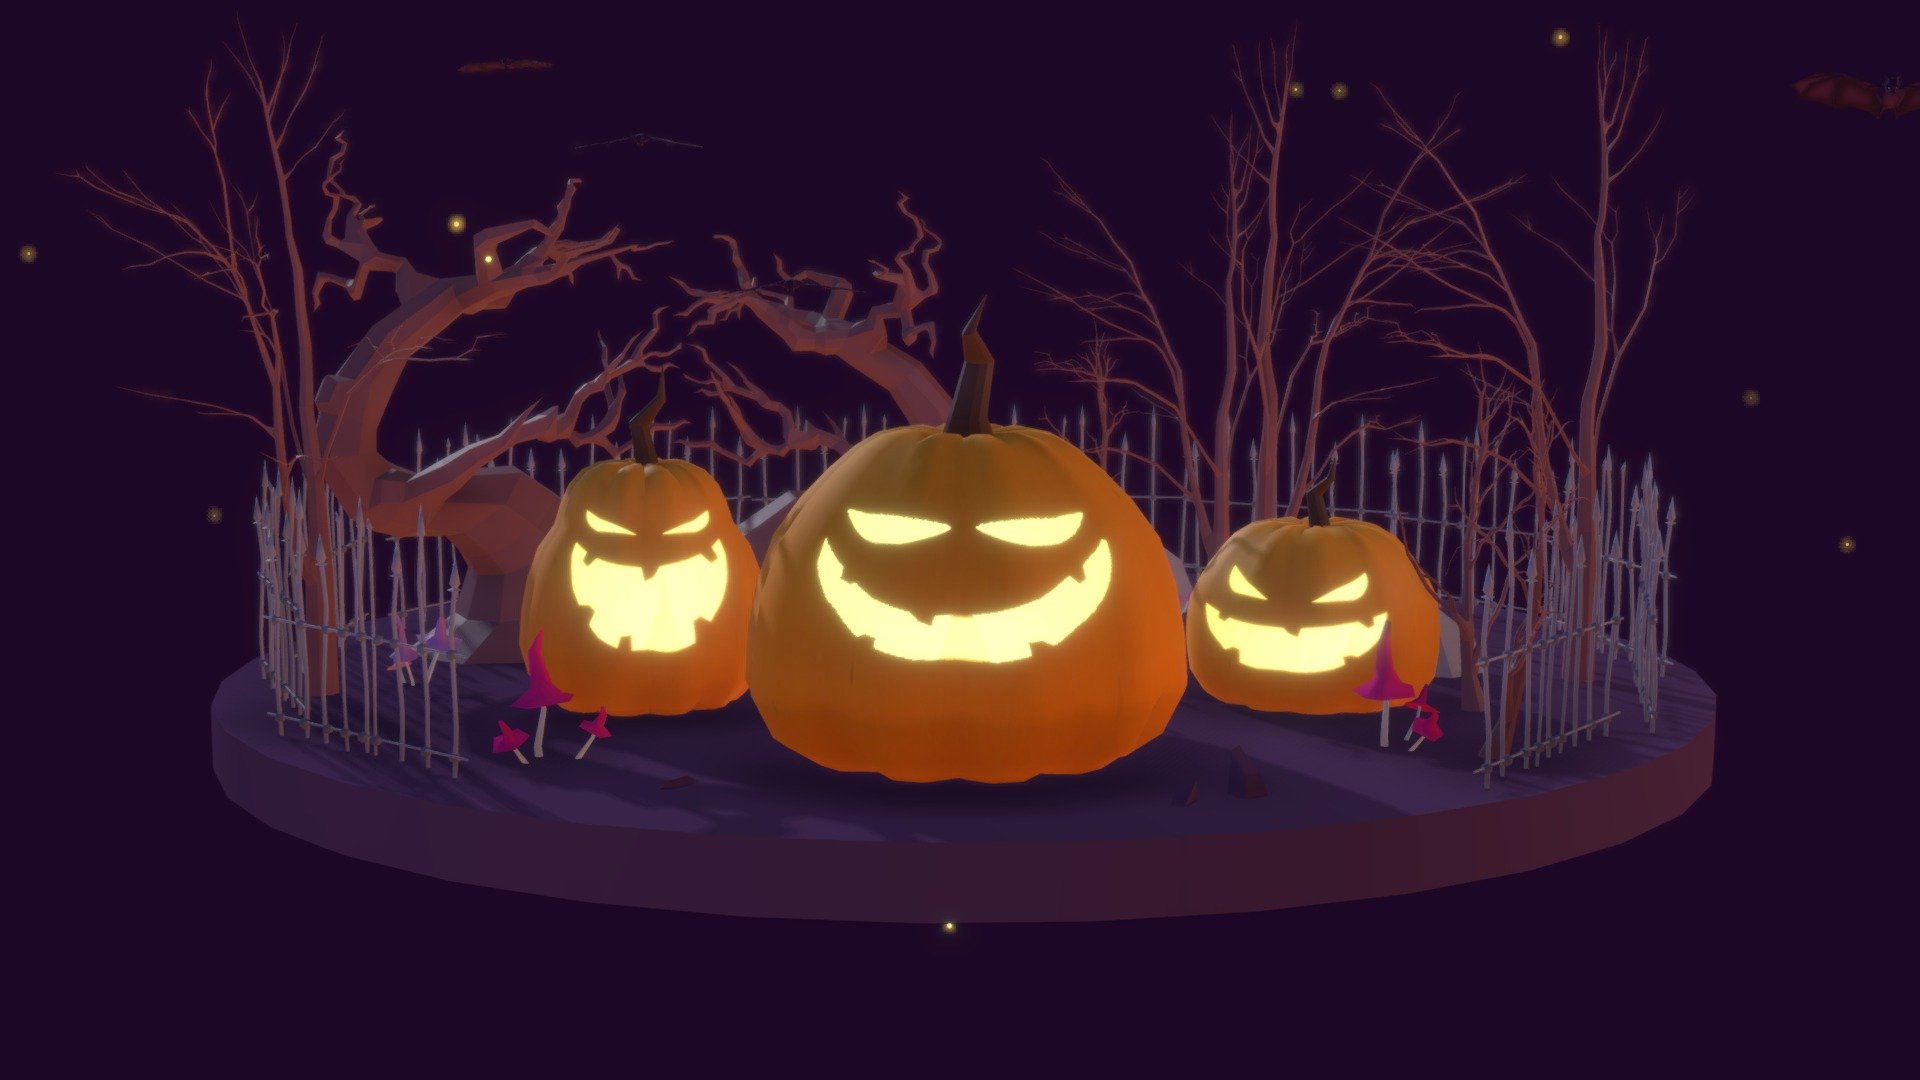 Cartoon Low Poly Halloween Set 3d illustration
Created on Cinema 4d R20
40 347 Polygons
Procedural Textured and UVW
Game Ready, VR Ready
Animation Ready
Include Scene and separated objects
 - Cartoon Low Poly Halloween Pack - 3D model by Render Bunny (@renderbunny) 3d model